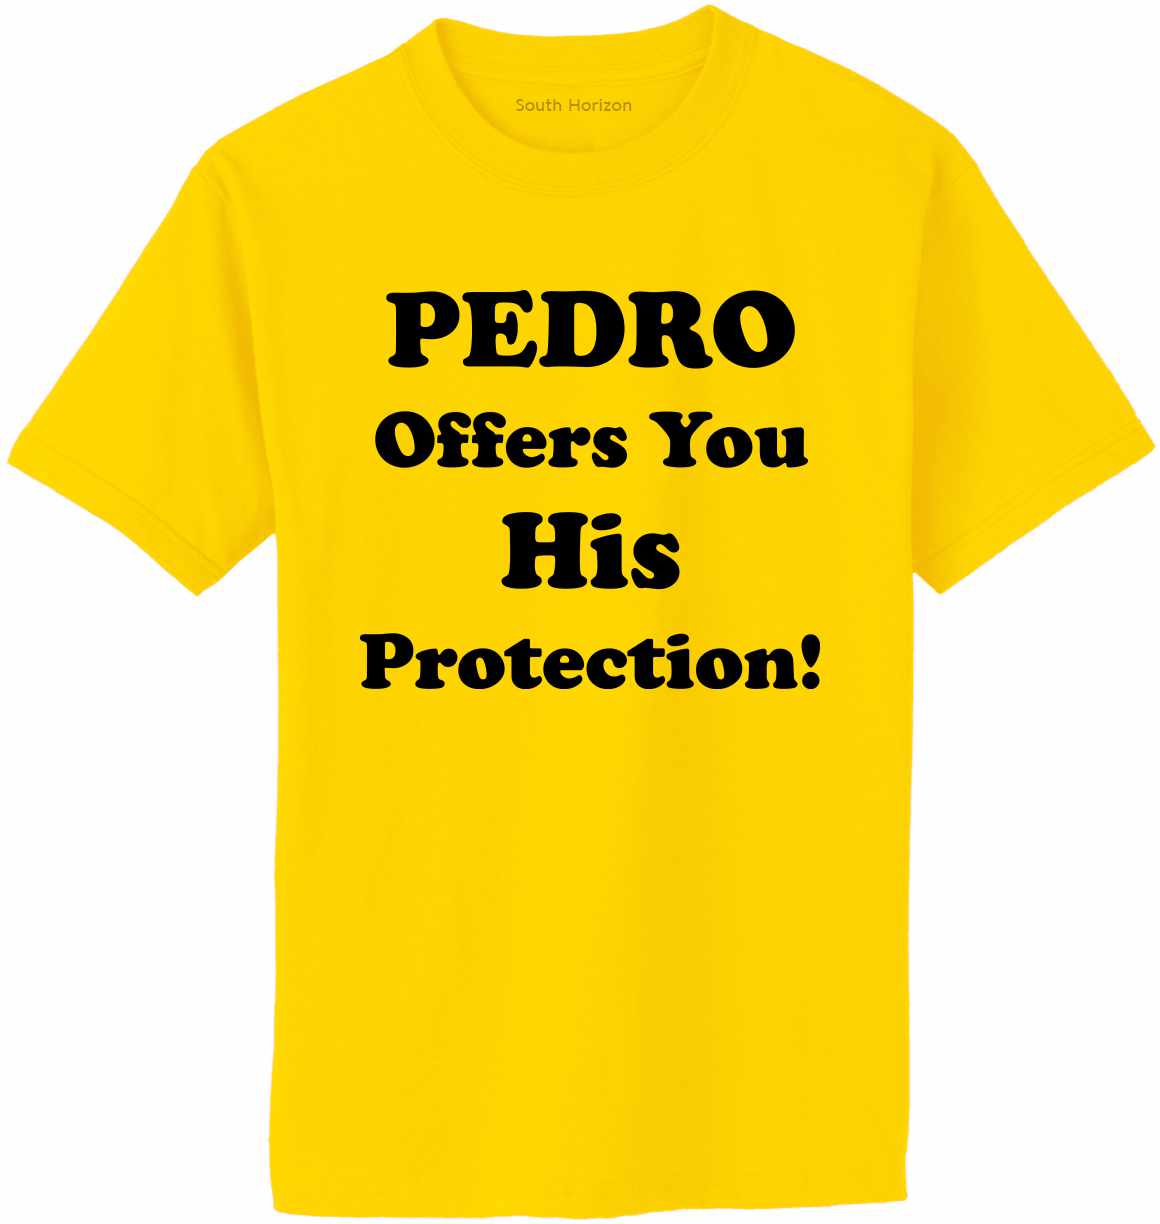 PEDRO OFFERS YOU HIS PROTECTION Adult T-Shirt (#385-1)